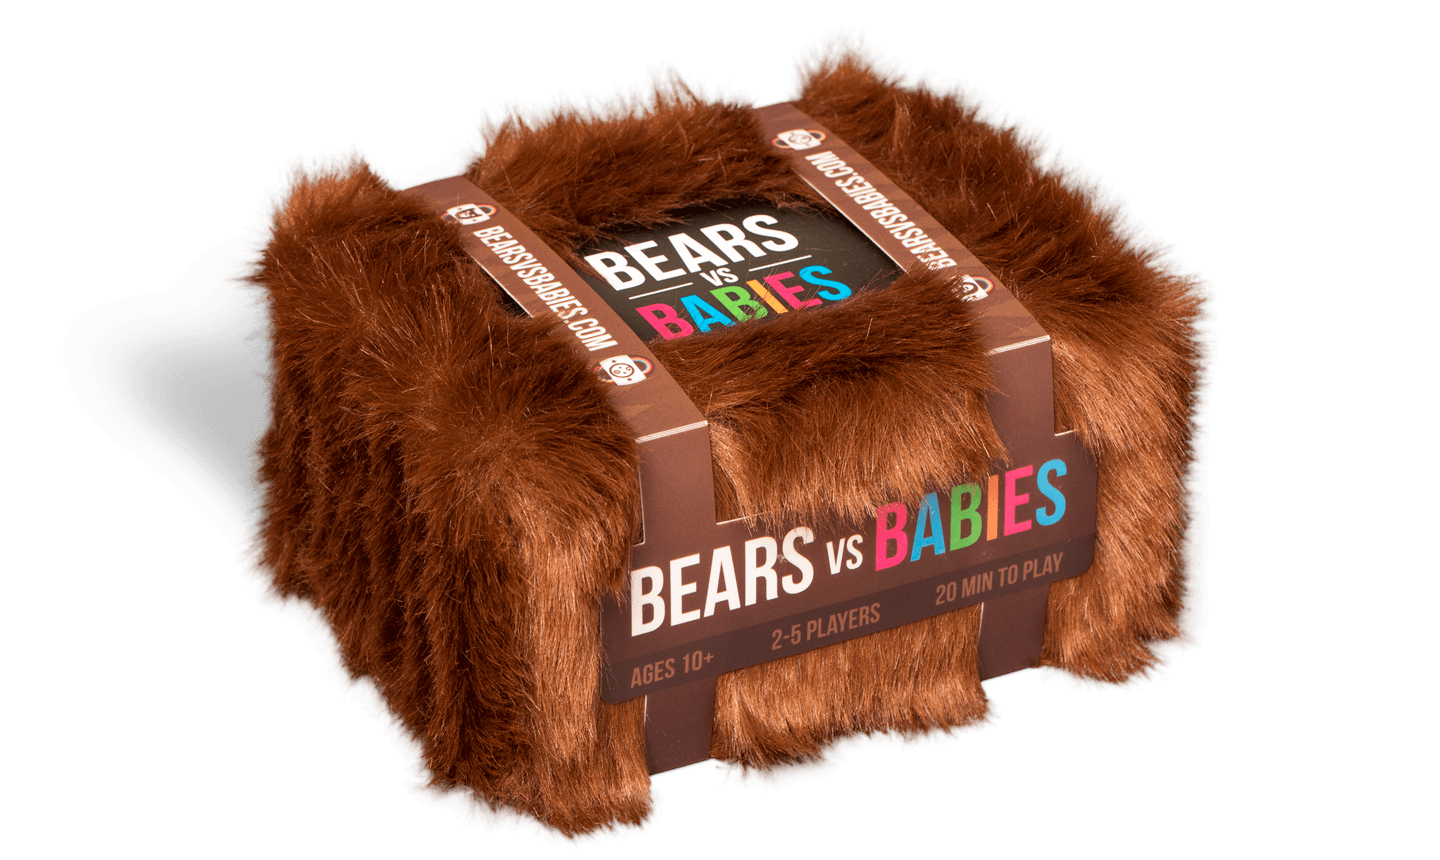 Bears vs Babies - Ages 10+